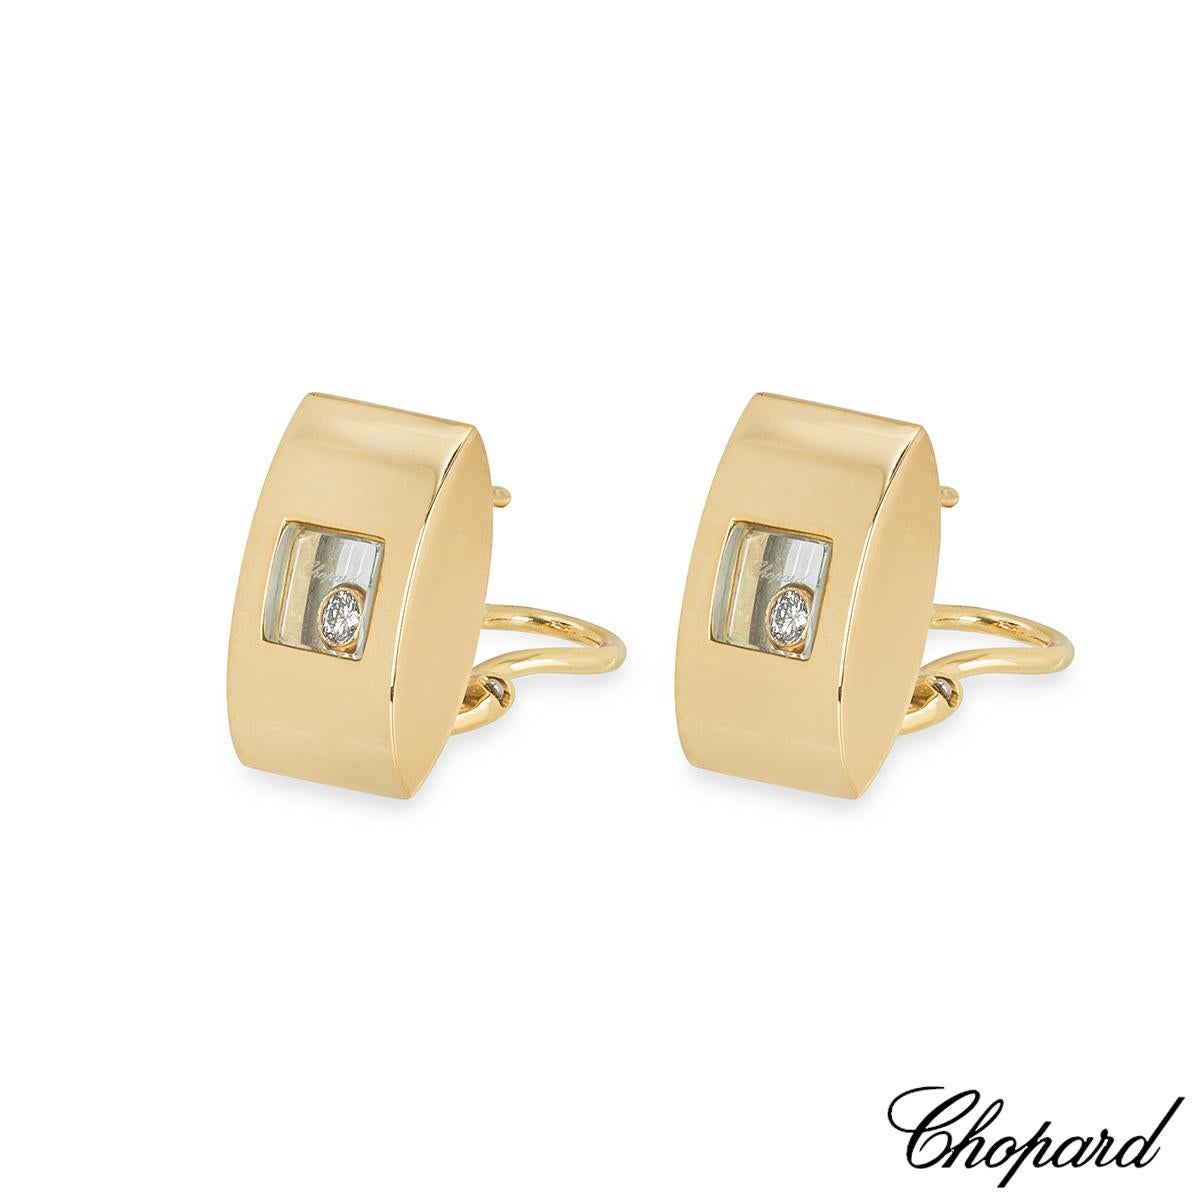 A pair of 18k yellow gold earrings by Chopard from the Happy Diamonds collection. The earrings feature a curved rectangular design with a single floating diamond encased behind the iconic Chopard signed glass. The diamonds have a total weight of